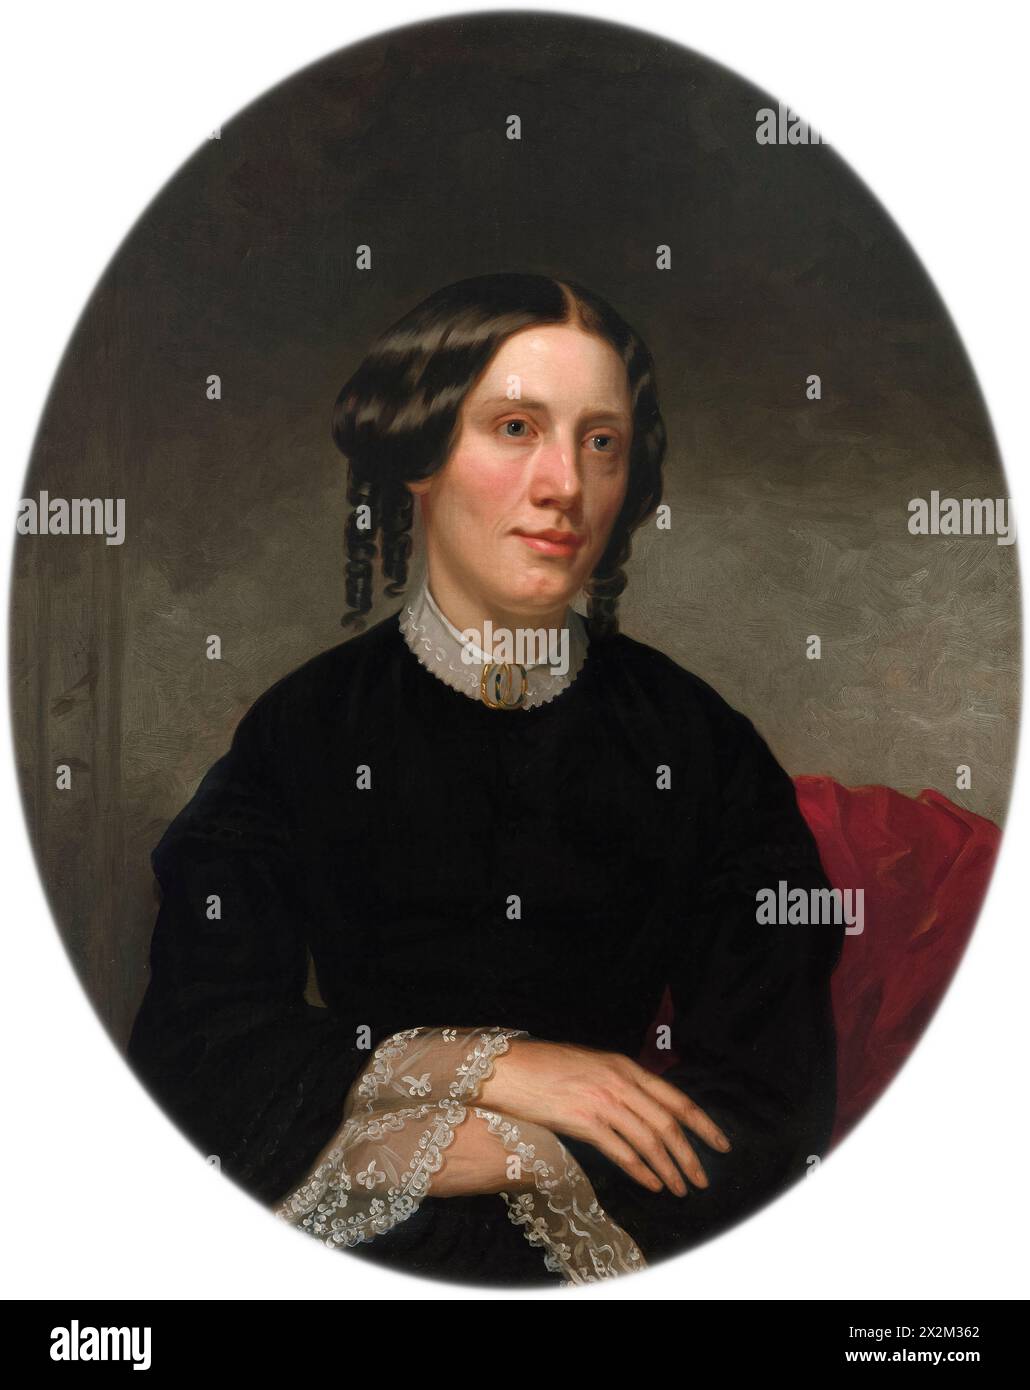 Portrait of Harriet Beecher Stowe by American artist Alanson Fisher (1807-1884) painted in 1853. This portrait was commissioned a year after the publication of Stowe’s bestselling novel 'Uncle Tom's Cabin’ that did much to progress the abolitionist cause in 1850s. Stock Photo